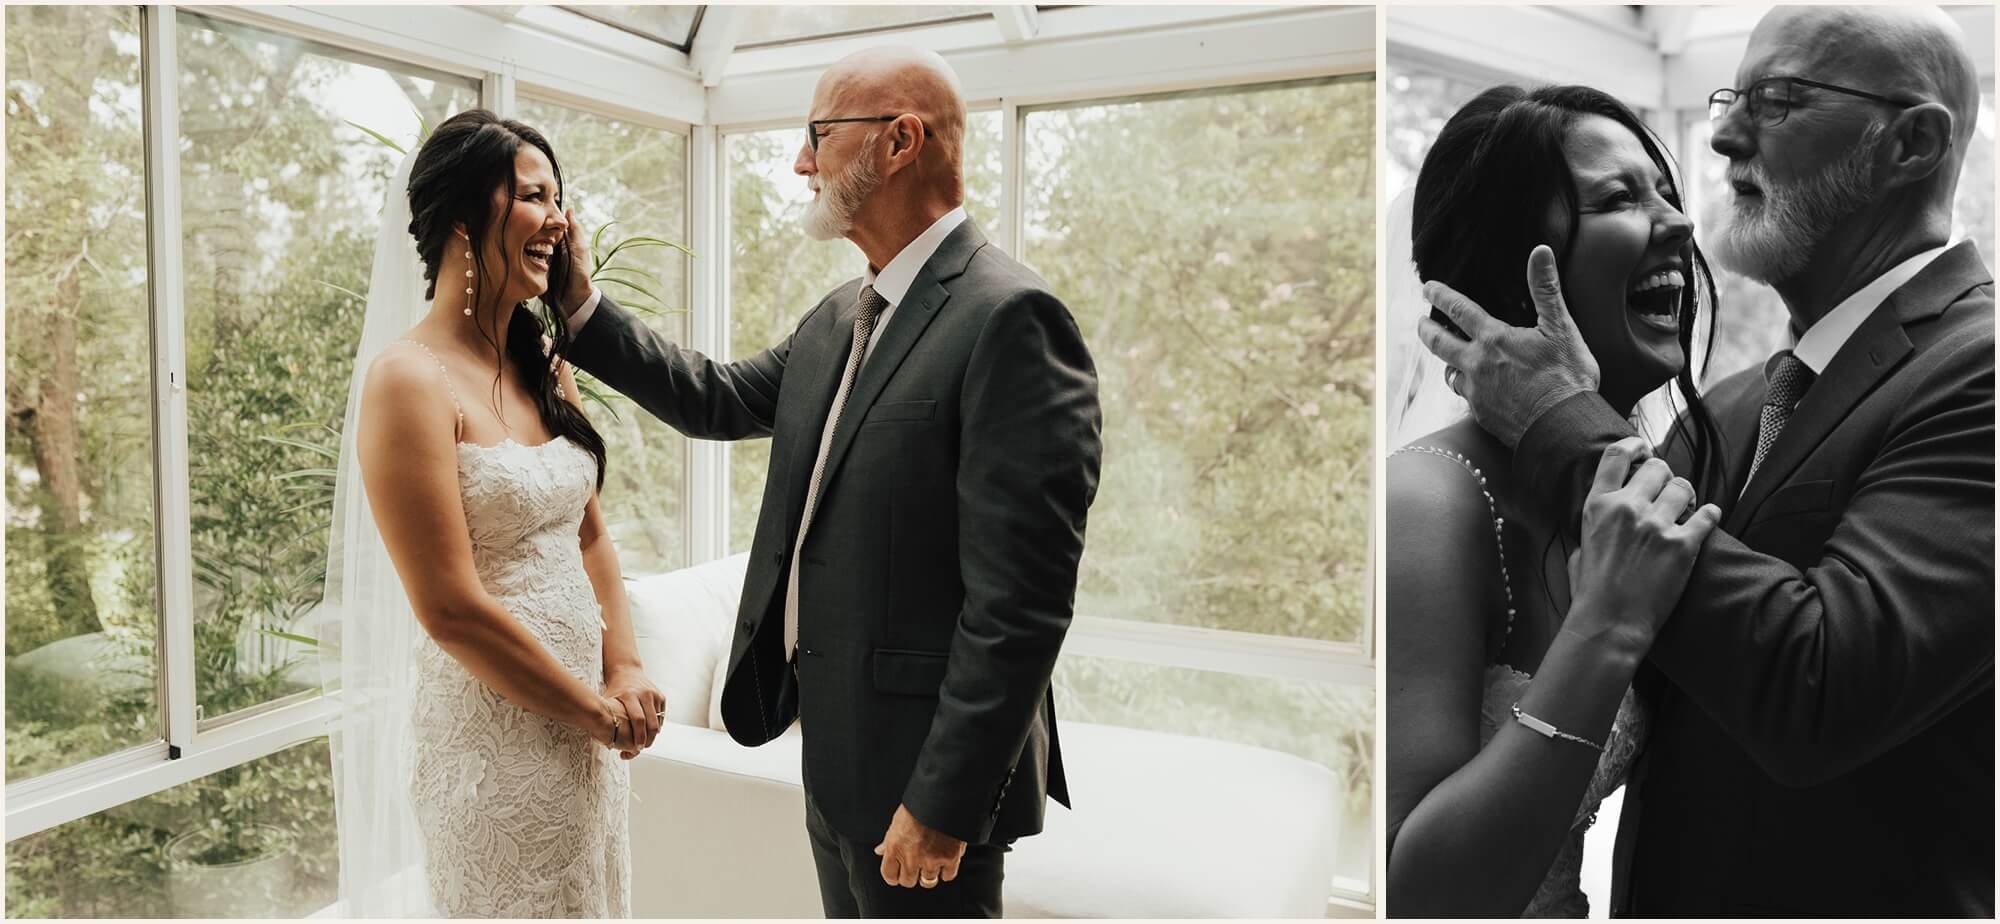 Dad admiring daughter and laughing together during first look